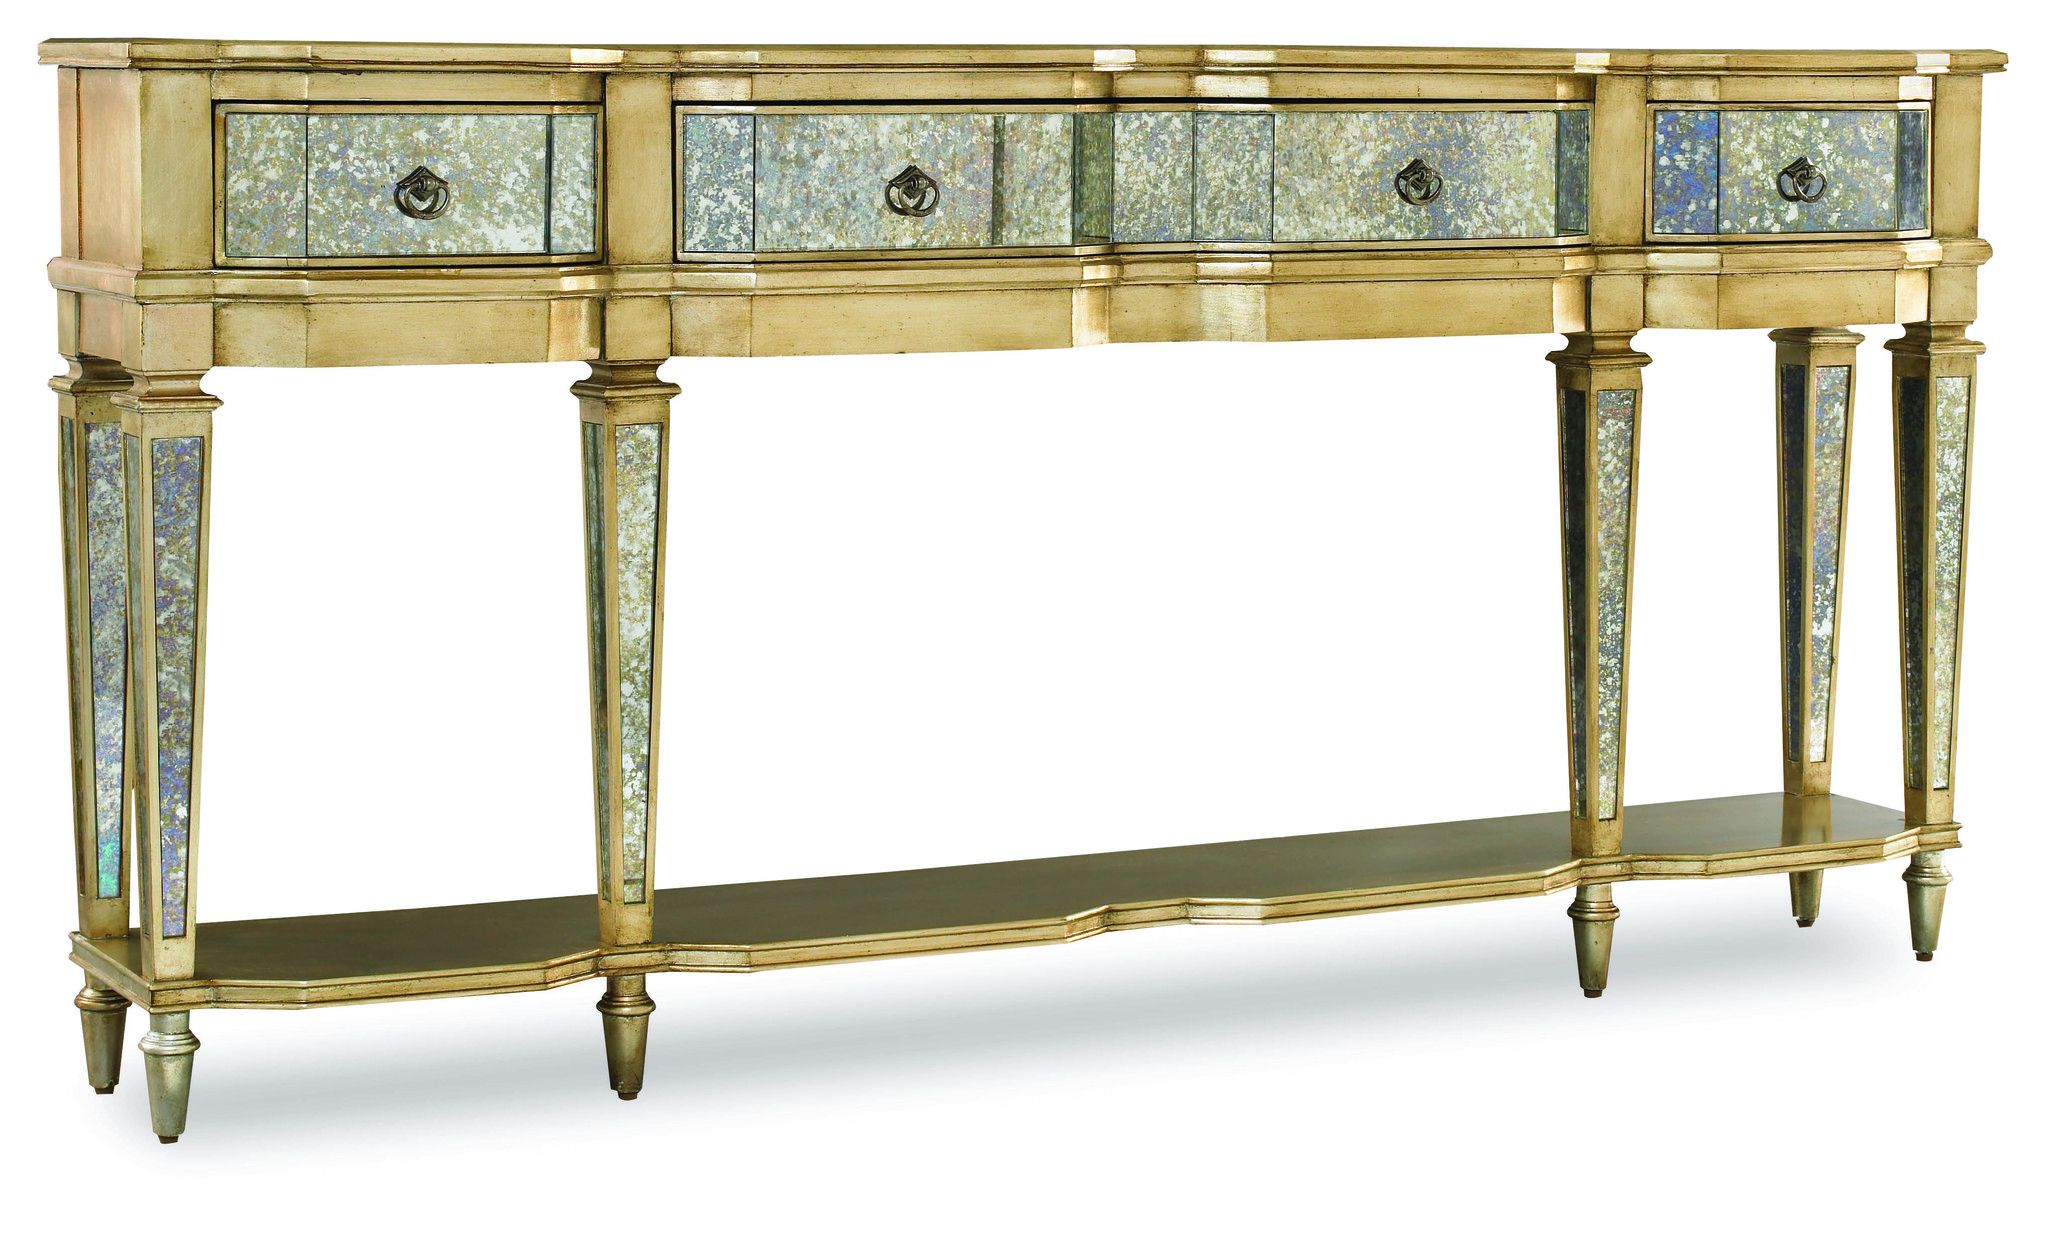 The Sanctuary Antique Mirror & Gold Consolehooker Furniture Intended For Antique Blue Gold Console Tables (View 3 of 20)